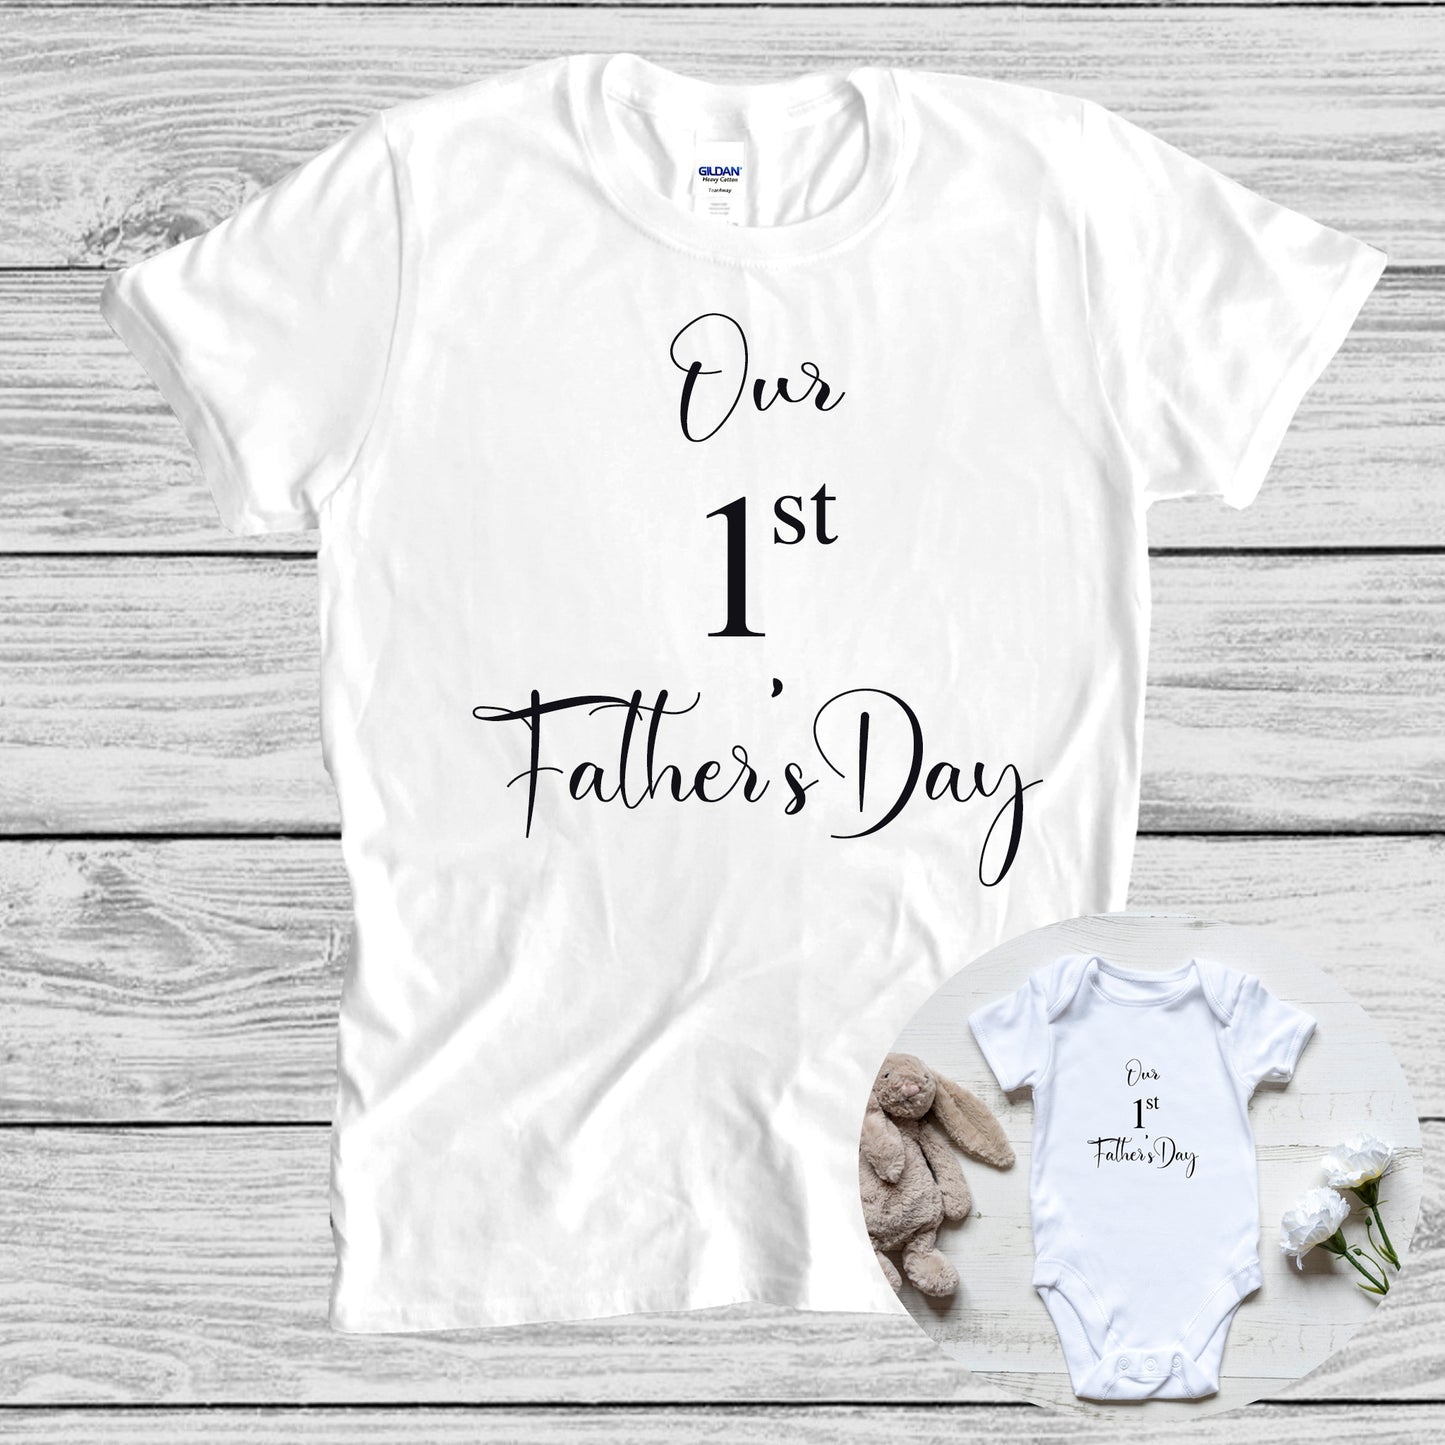 Dad and Baby 1st Fathers Day Tshirt and Vest Combo